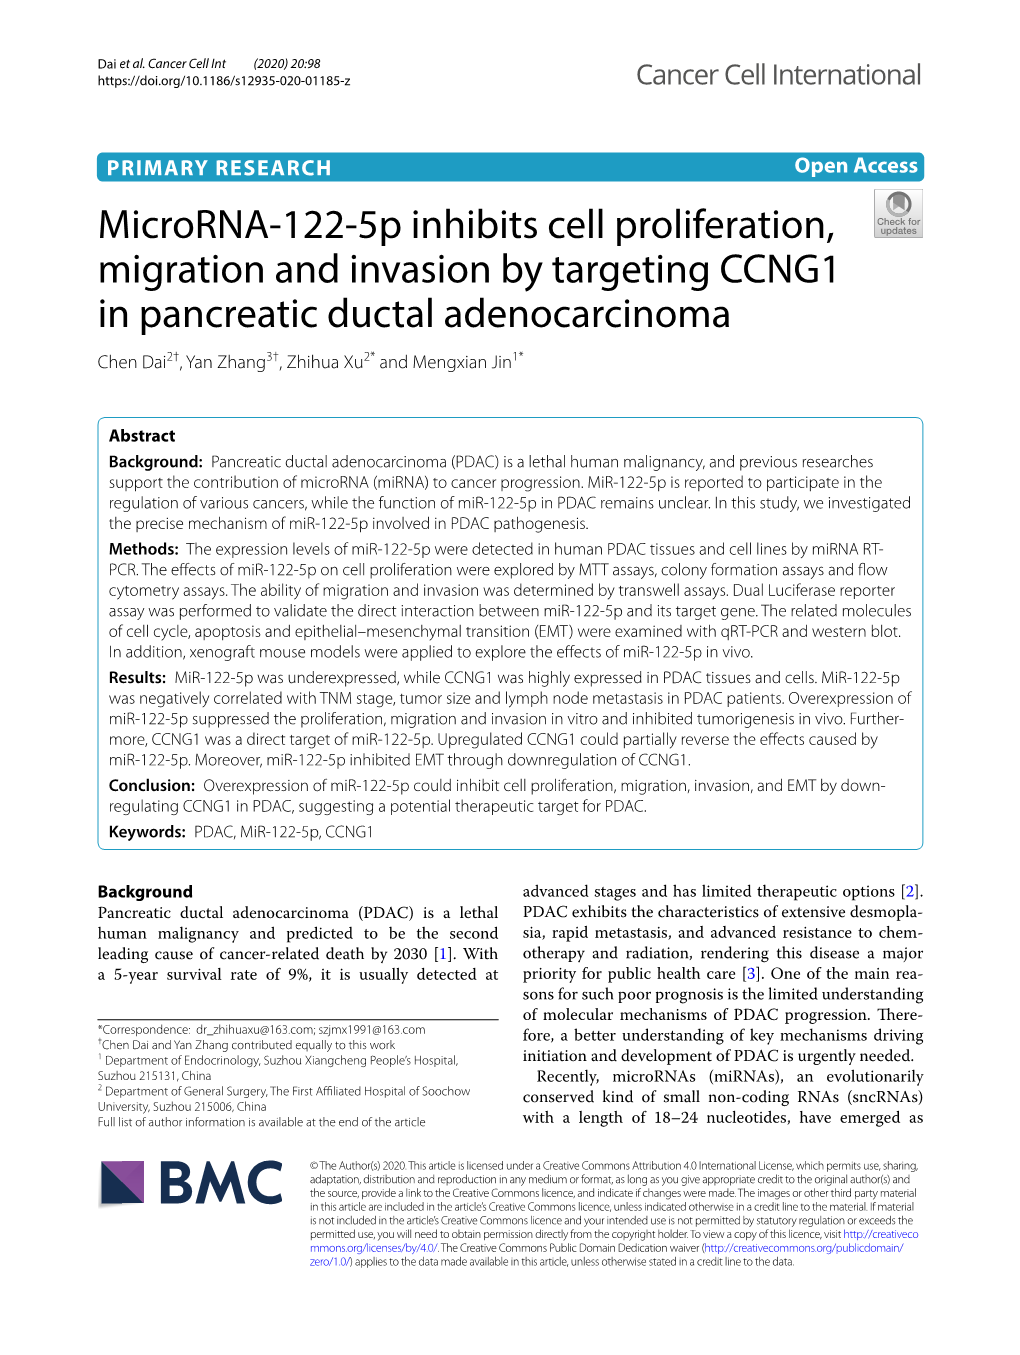 Microrna-122-5P Inhibits Cell Proliferation, Migration and Invasion